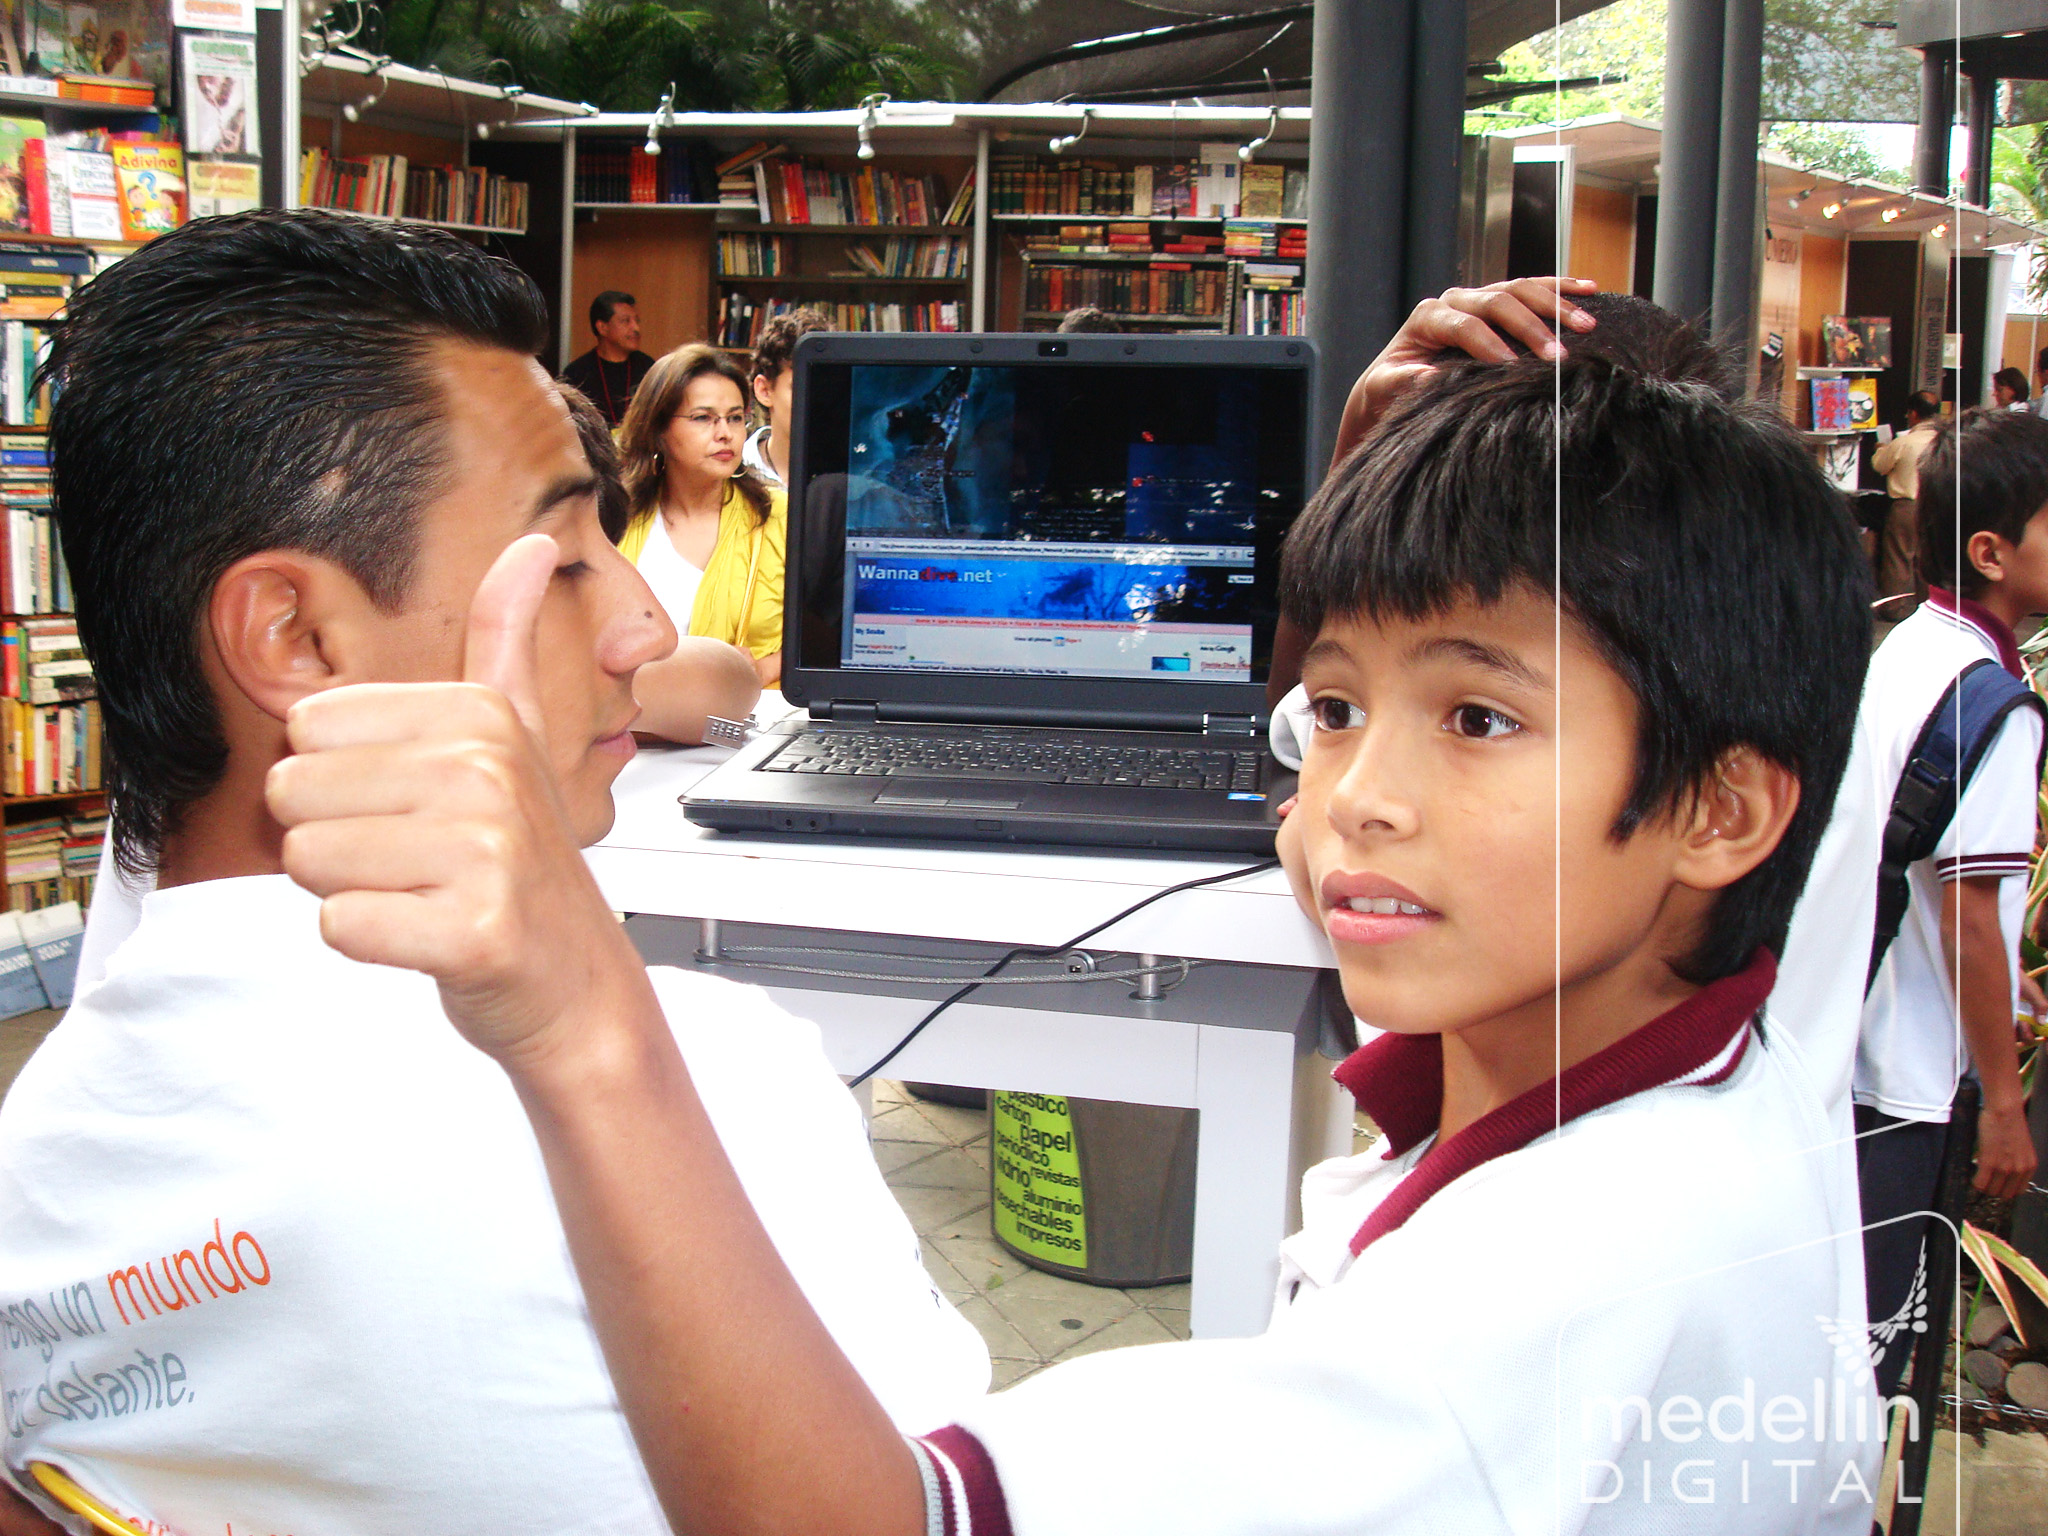 a boy on a laptop being examined by an adult in a public liry